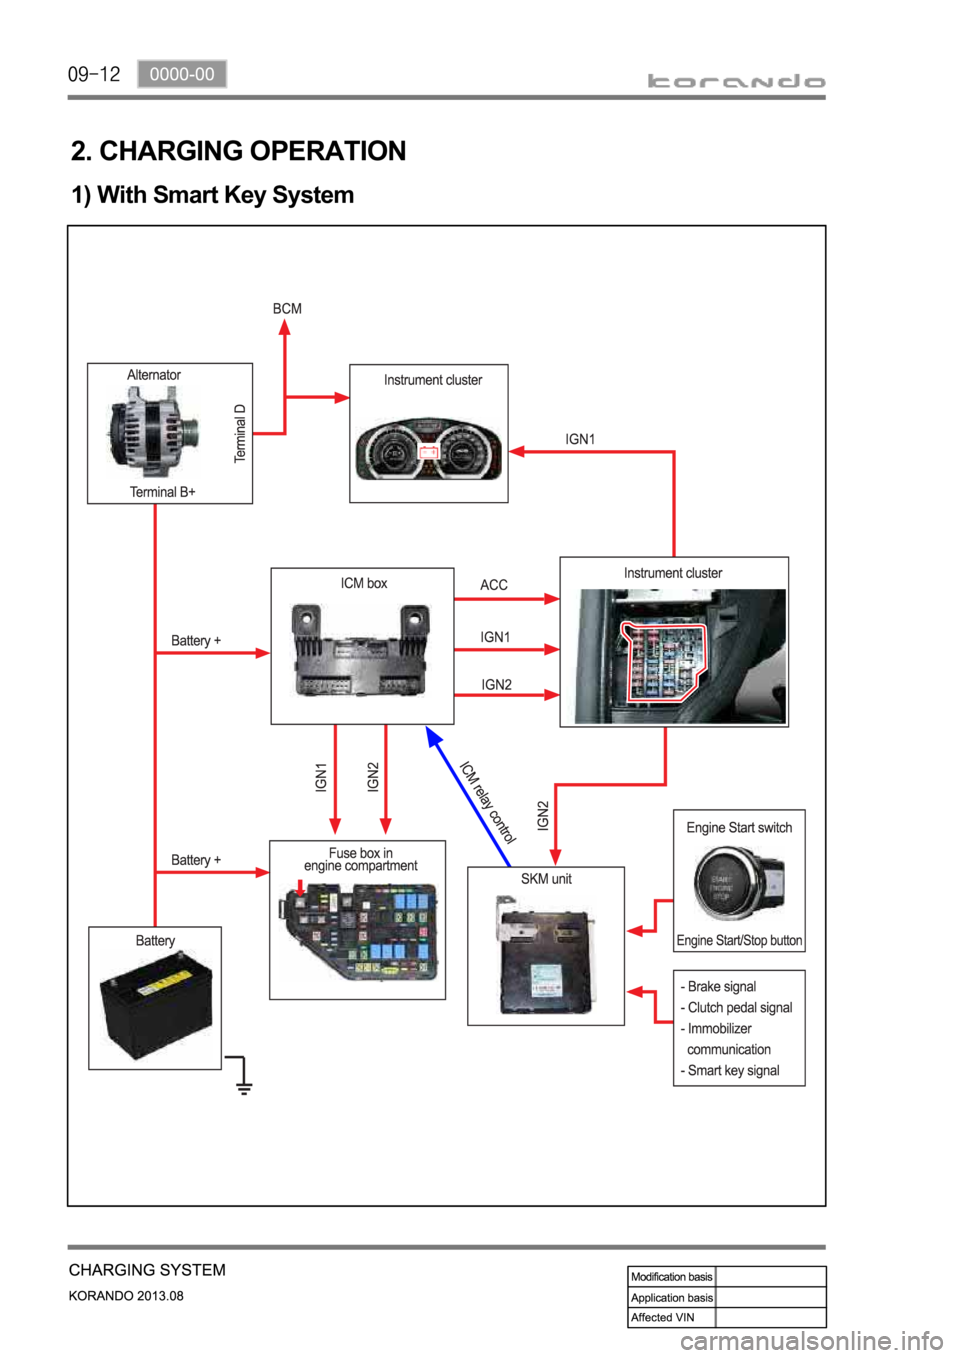 SSANGYONG KORANDO 2013  Service Manual 2. CHARGING OPERATION
1) With Smart Key System 